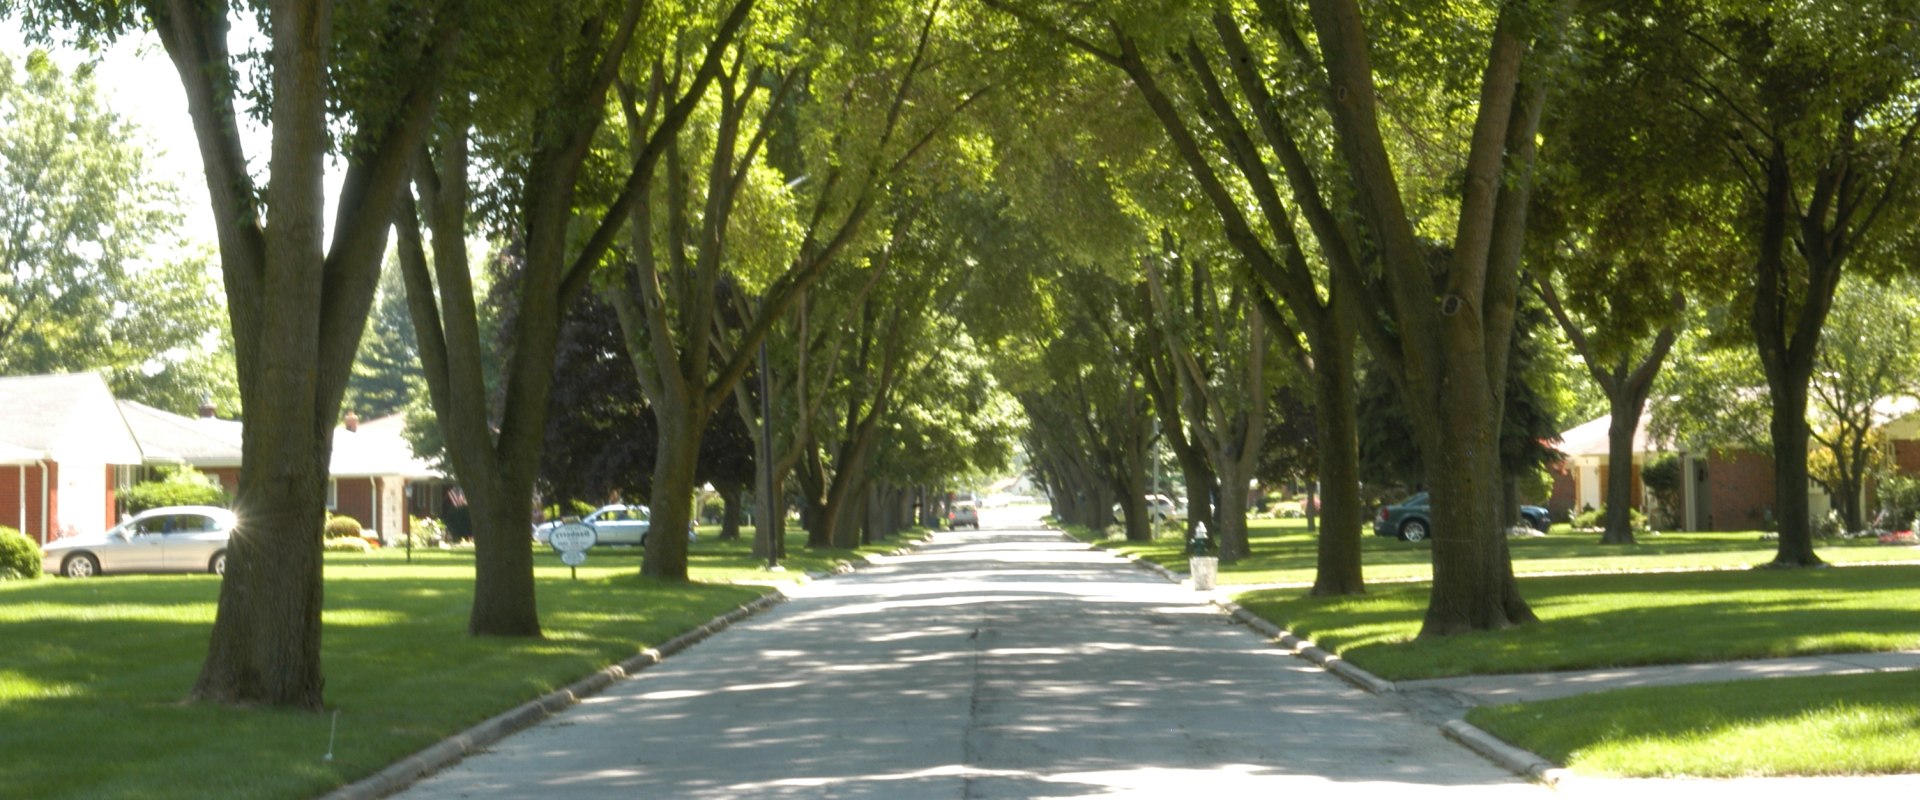 What are some of the benefits of urban trees?